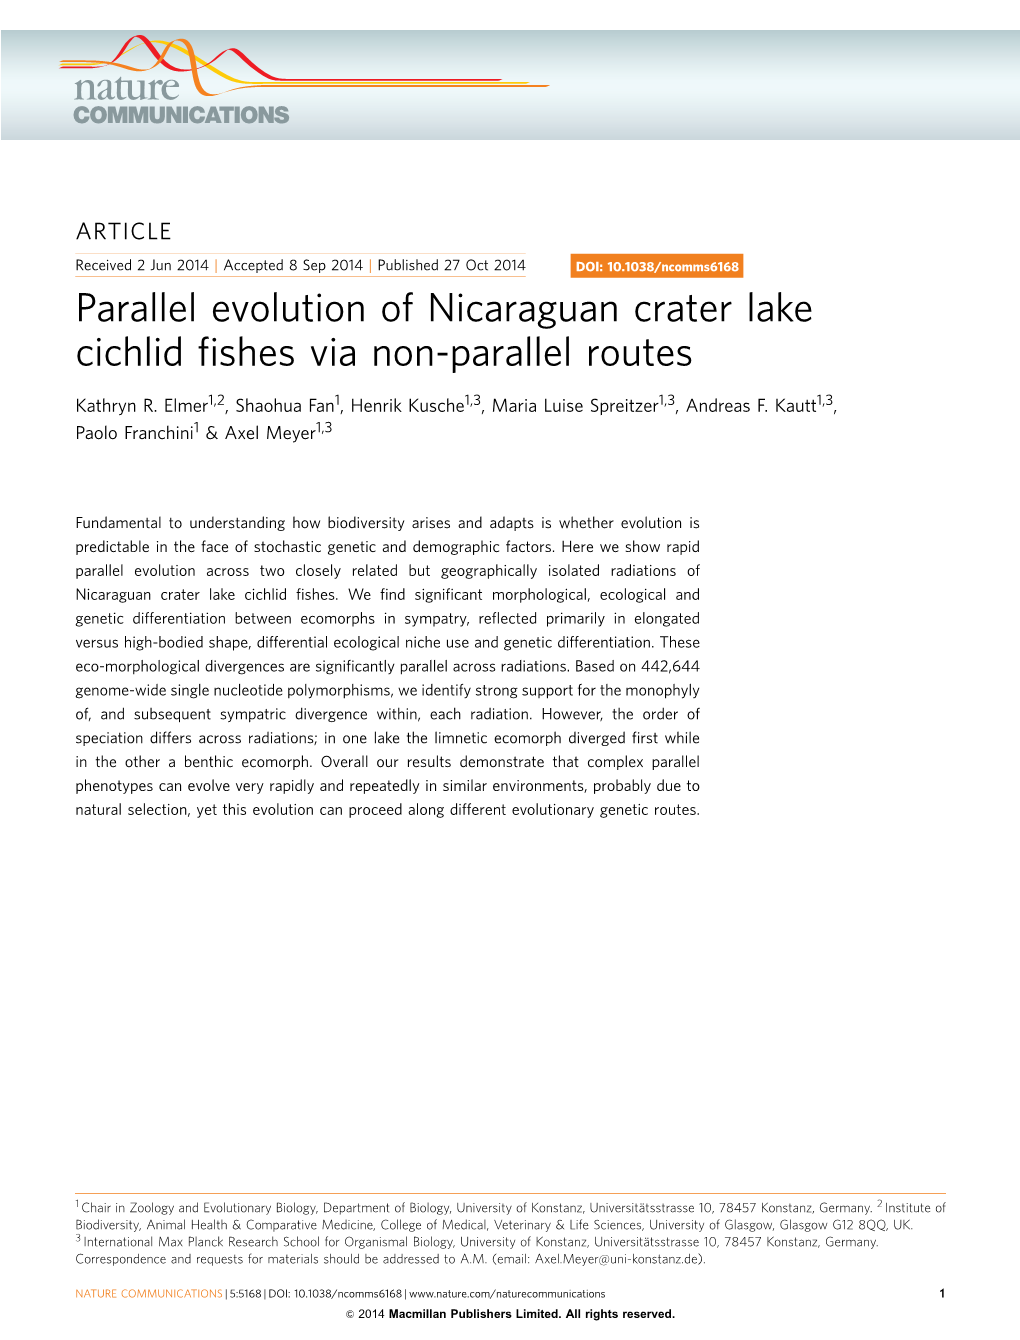 Parallel Evolution of Nicaraguan Crater Lake Cichlid Fishes Via Non-Parallel